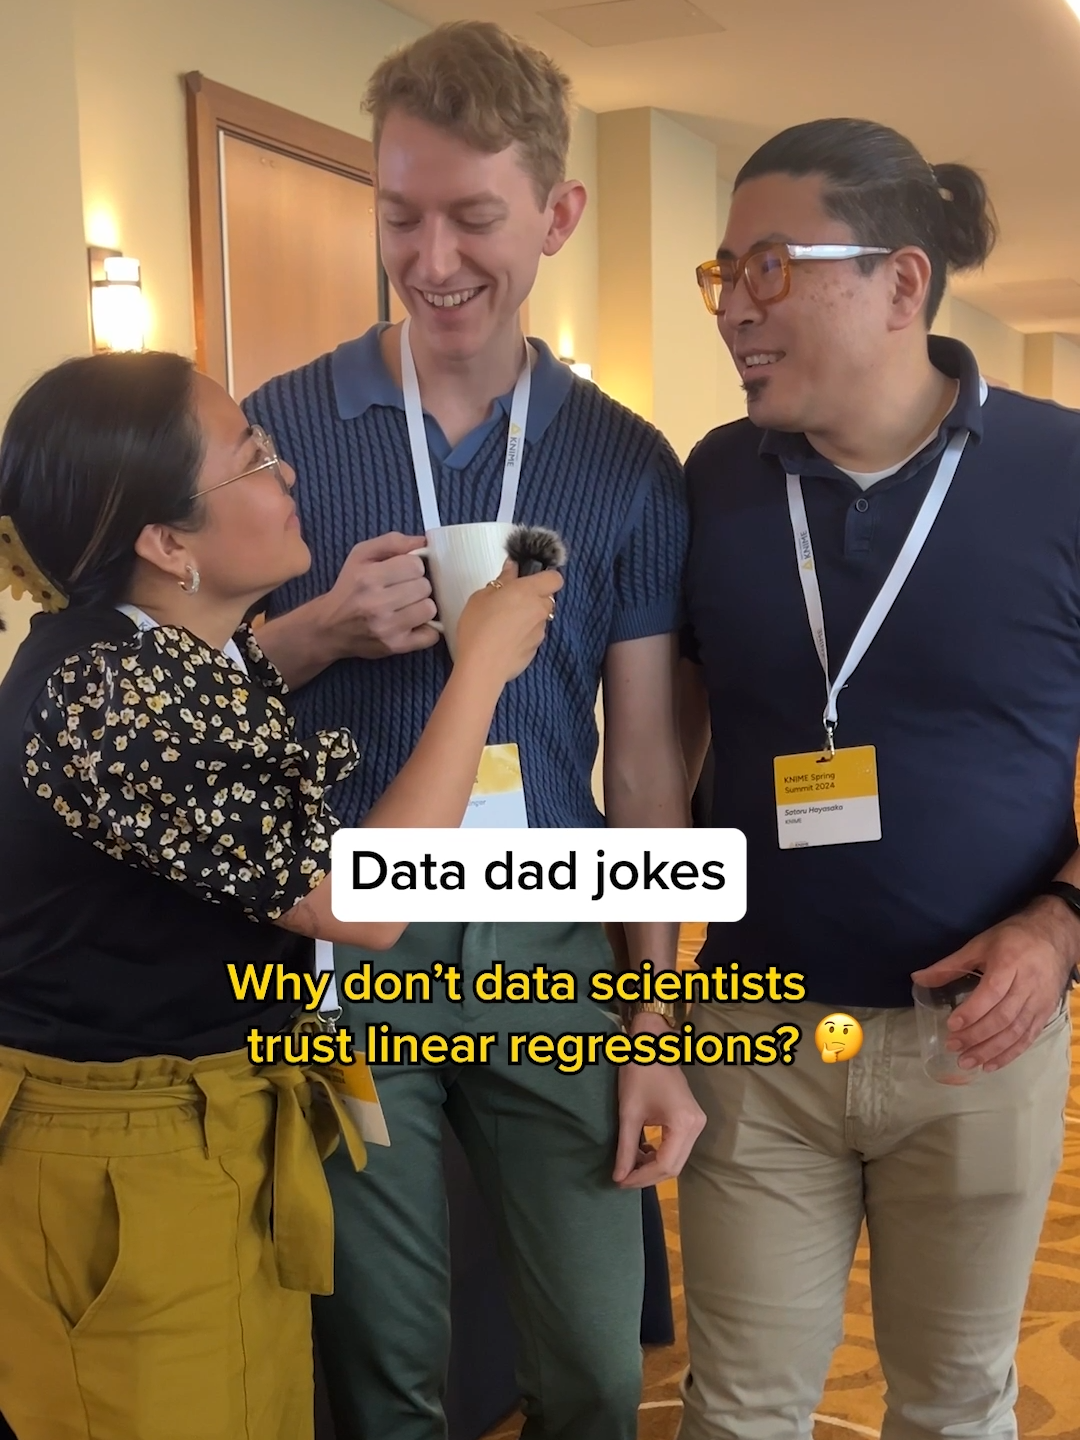 Disclaimer: No data scientists were (physically) harmed in the making of this video. #data #dadjokes #datascience